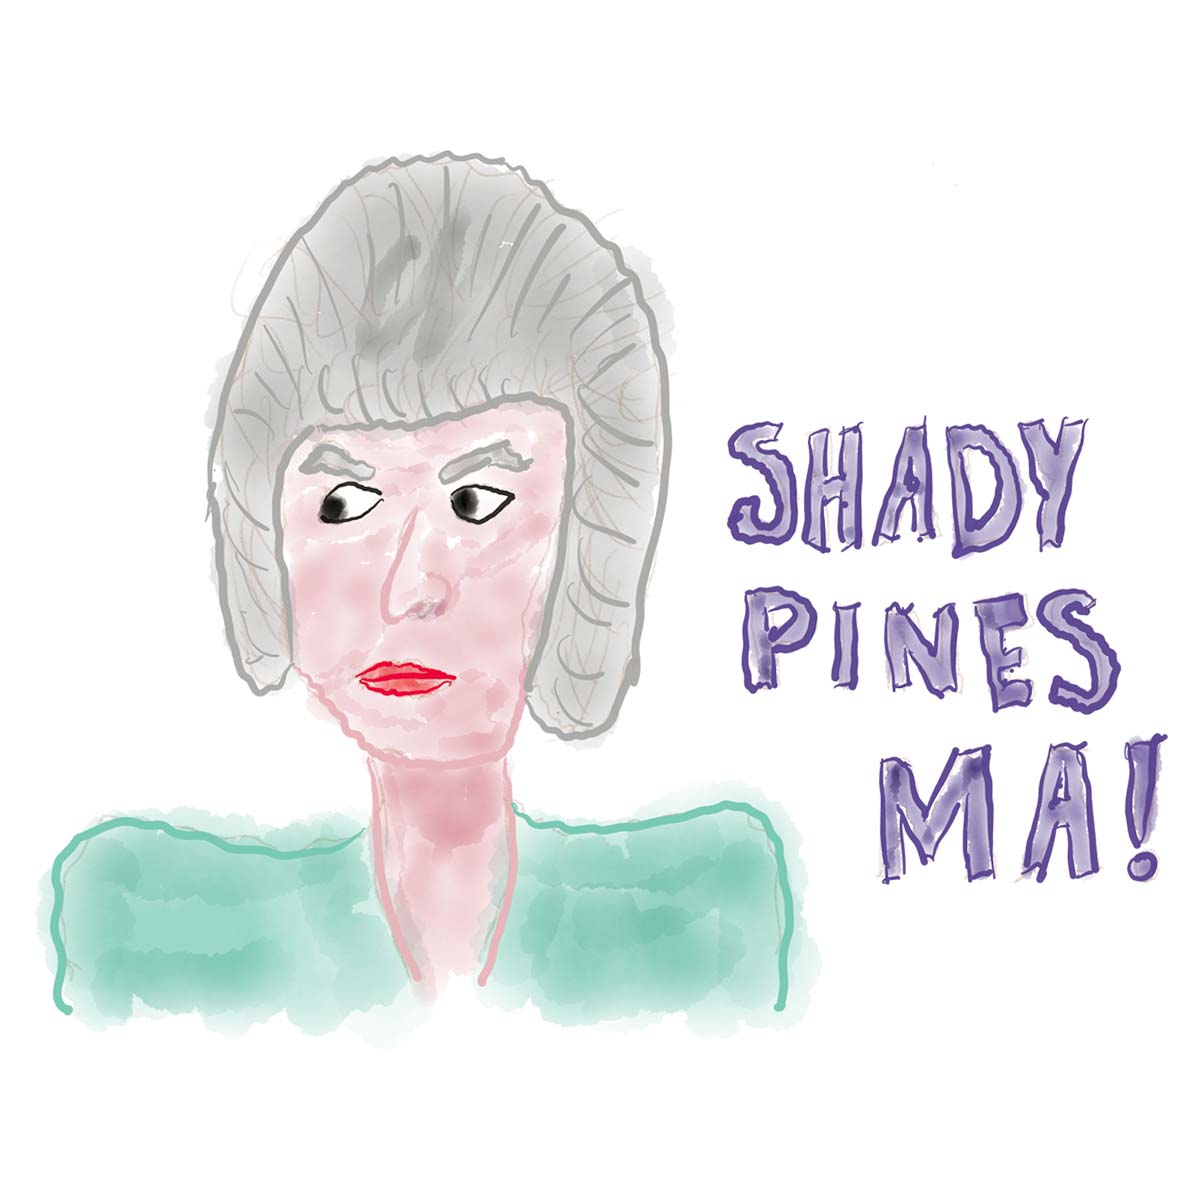 Dorothy golden girls caricature shady pines ma!